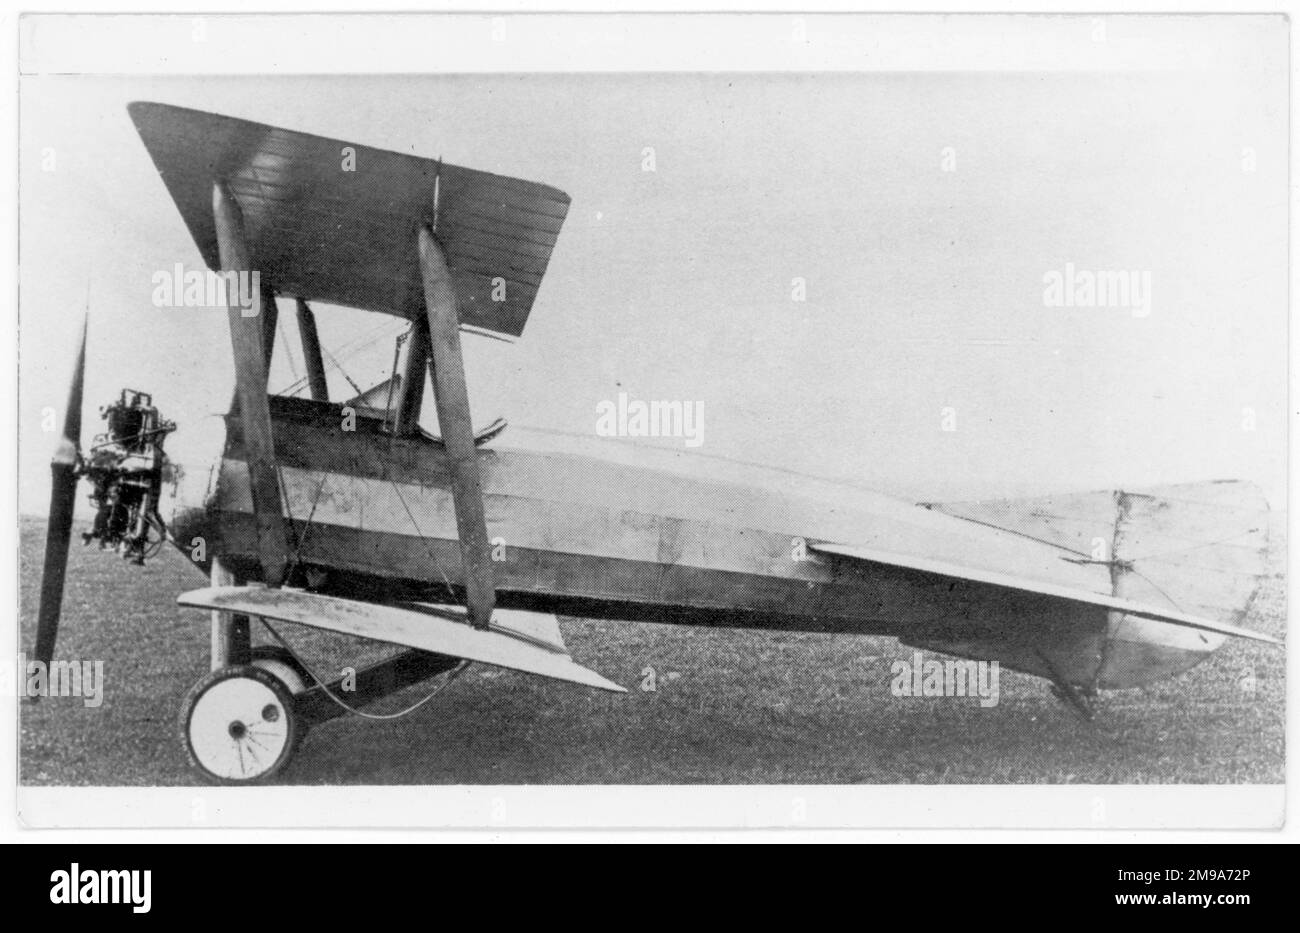 Ruffy-Bauman Advanced Trainer. Mr. Felix Ruffy and Mr. Edward Baumann founded a flying school at Hendon, but moved to Acton, where the Ruffy, Arnell and Baumann Aviation Co., Ltd. Designed and built the Advanced Trainer and other aircraft. Stock Photo